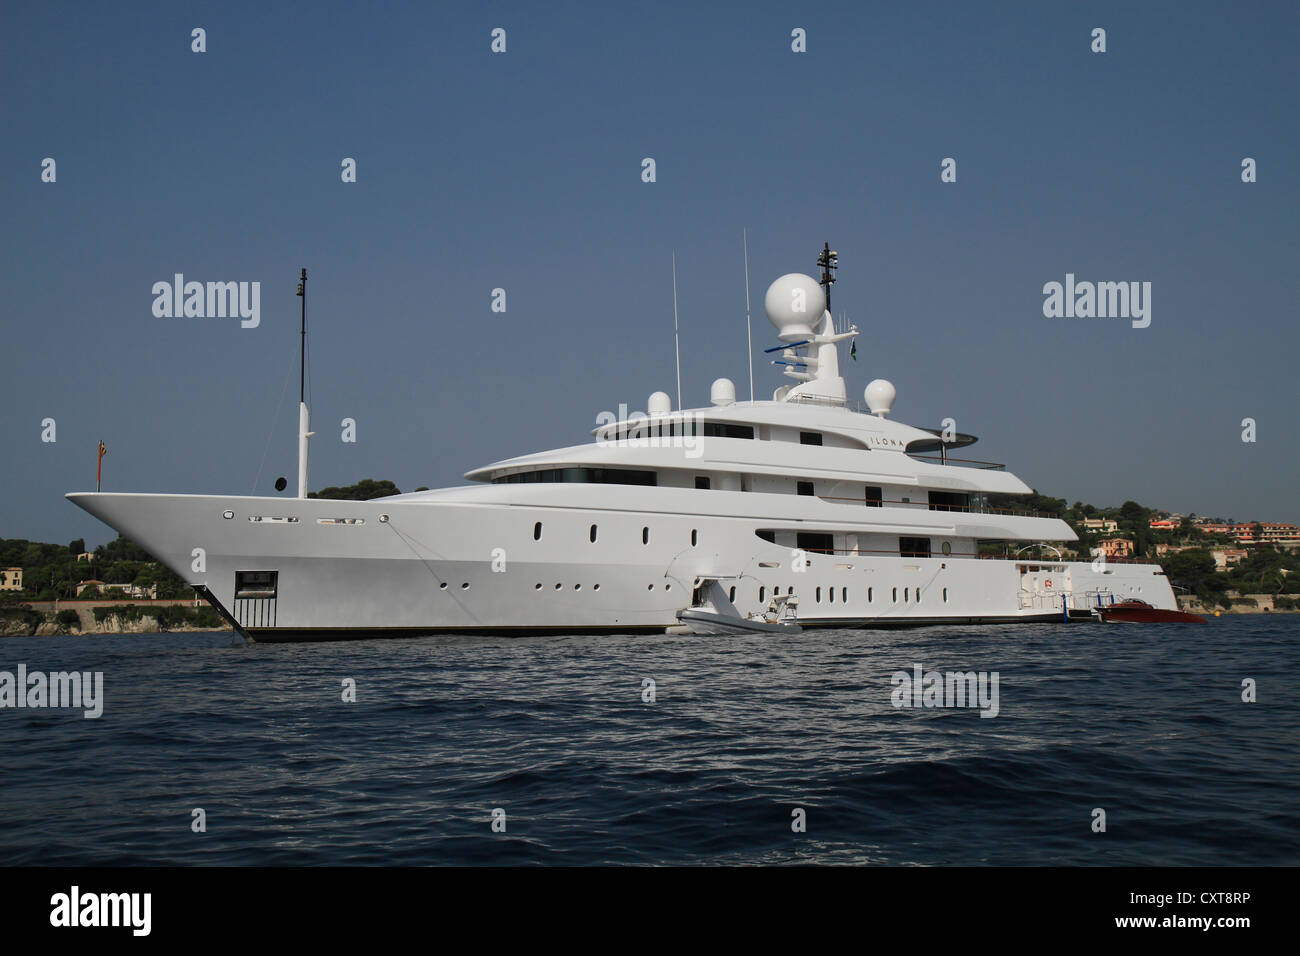 Ilona, a cruiser built by Amels Holland, length: 73.69 meters, built in 2004, Cap Ferrat, French Riviera, France, Europe Stock Photo